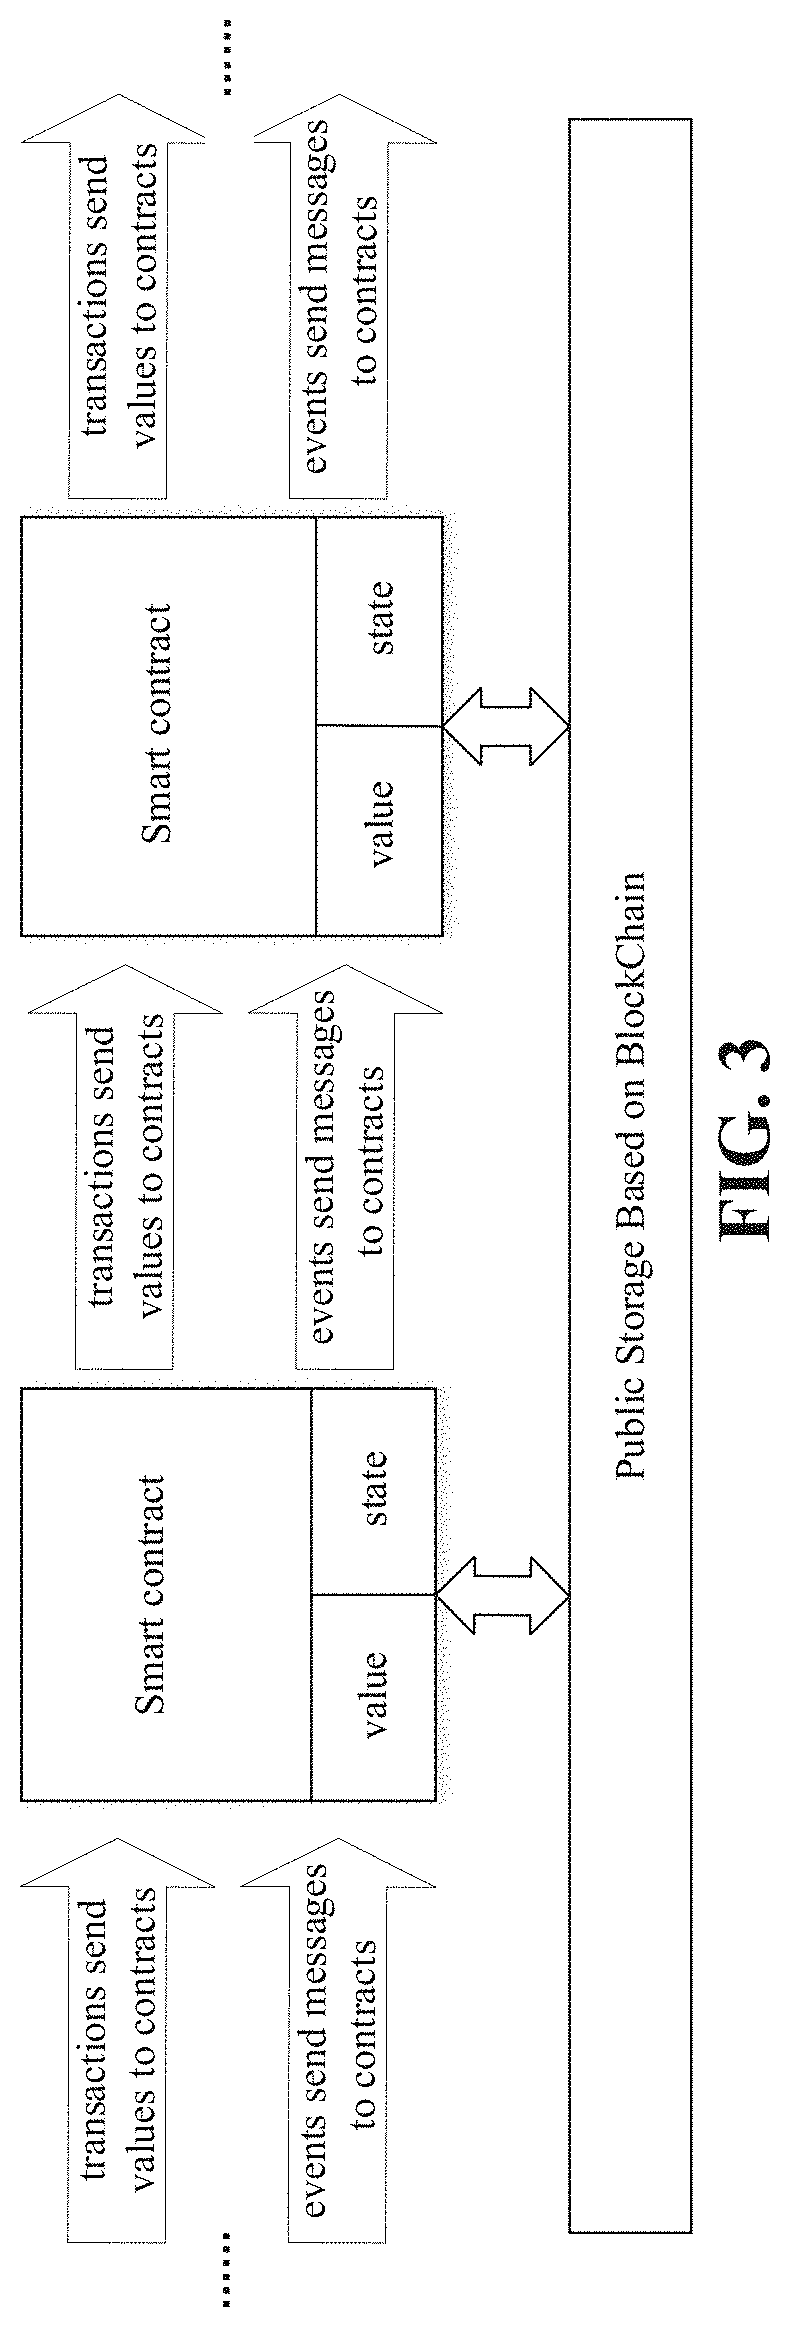 Method and System for Executable Smart Legal Contract Construction and Execution over Legal Contracts